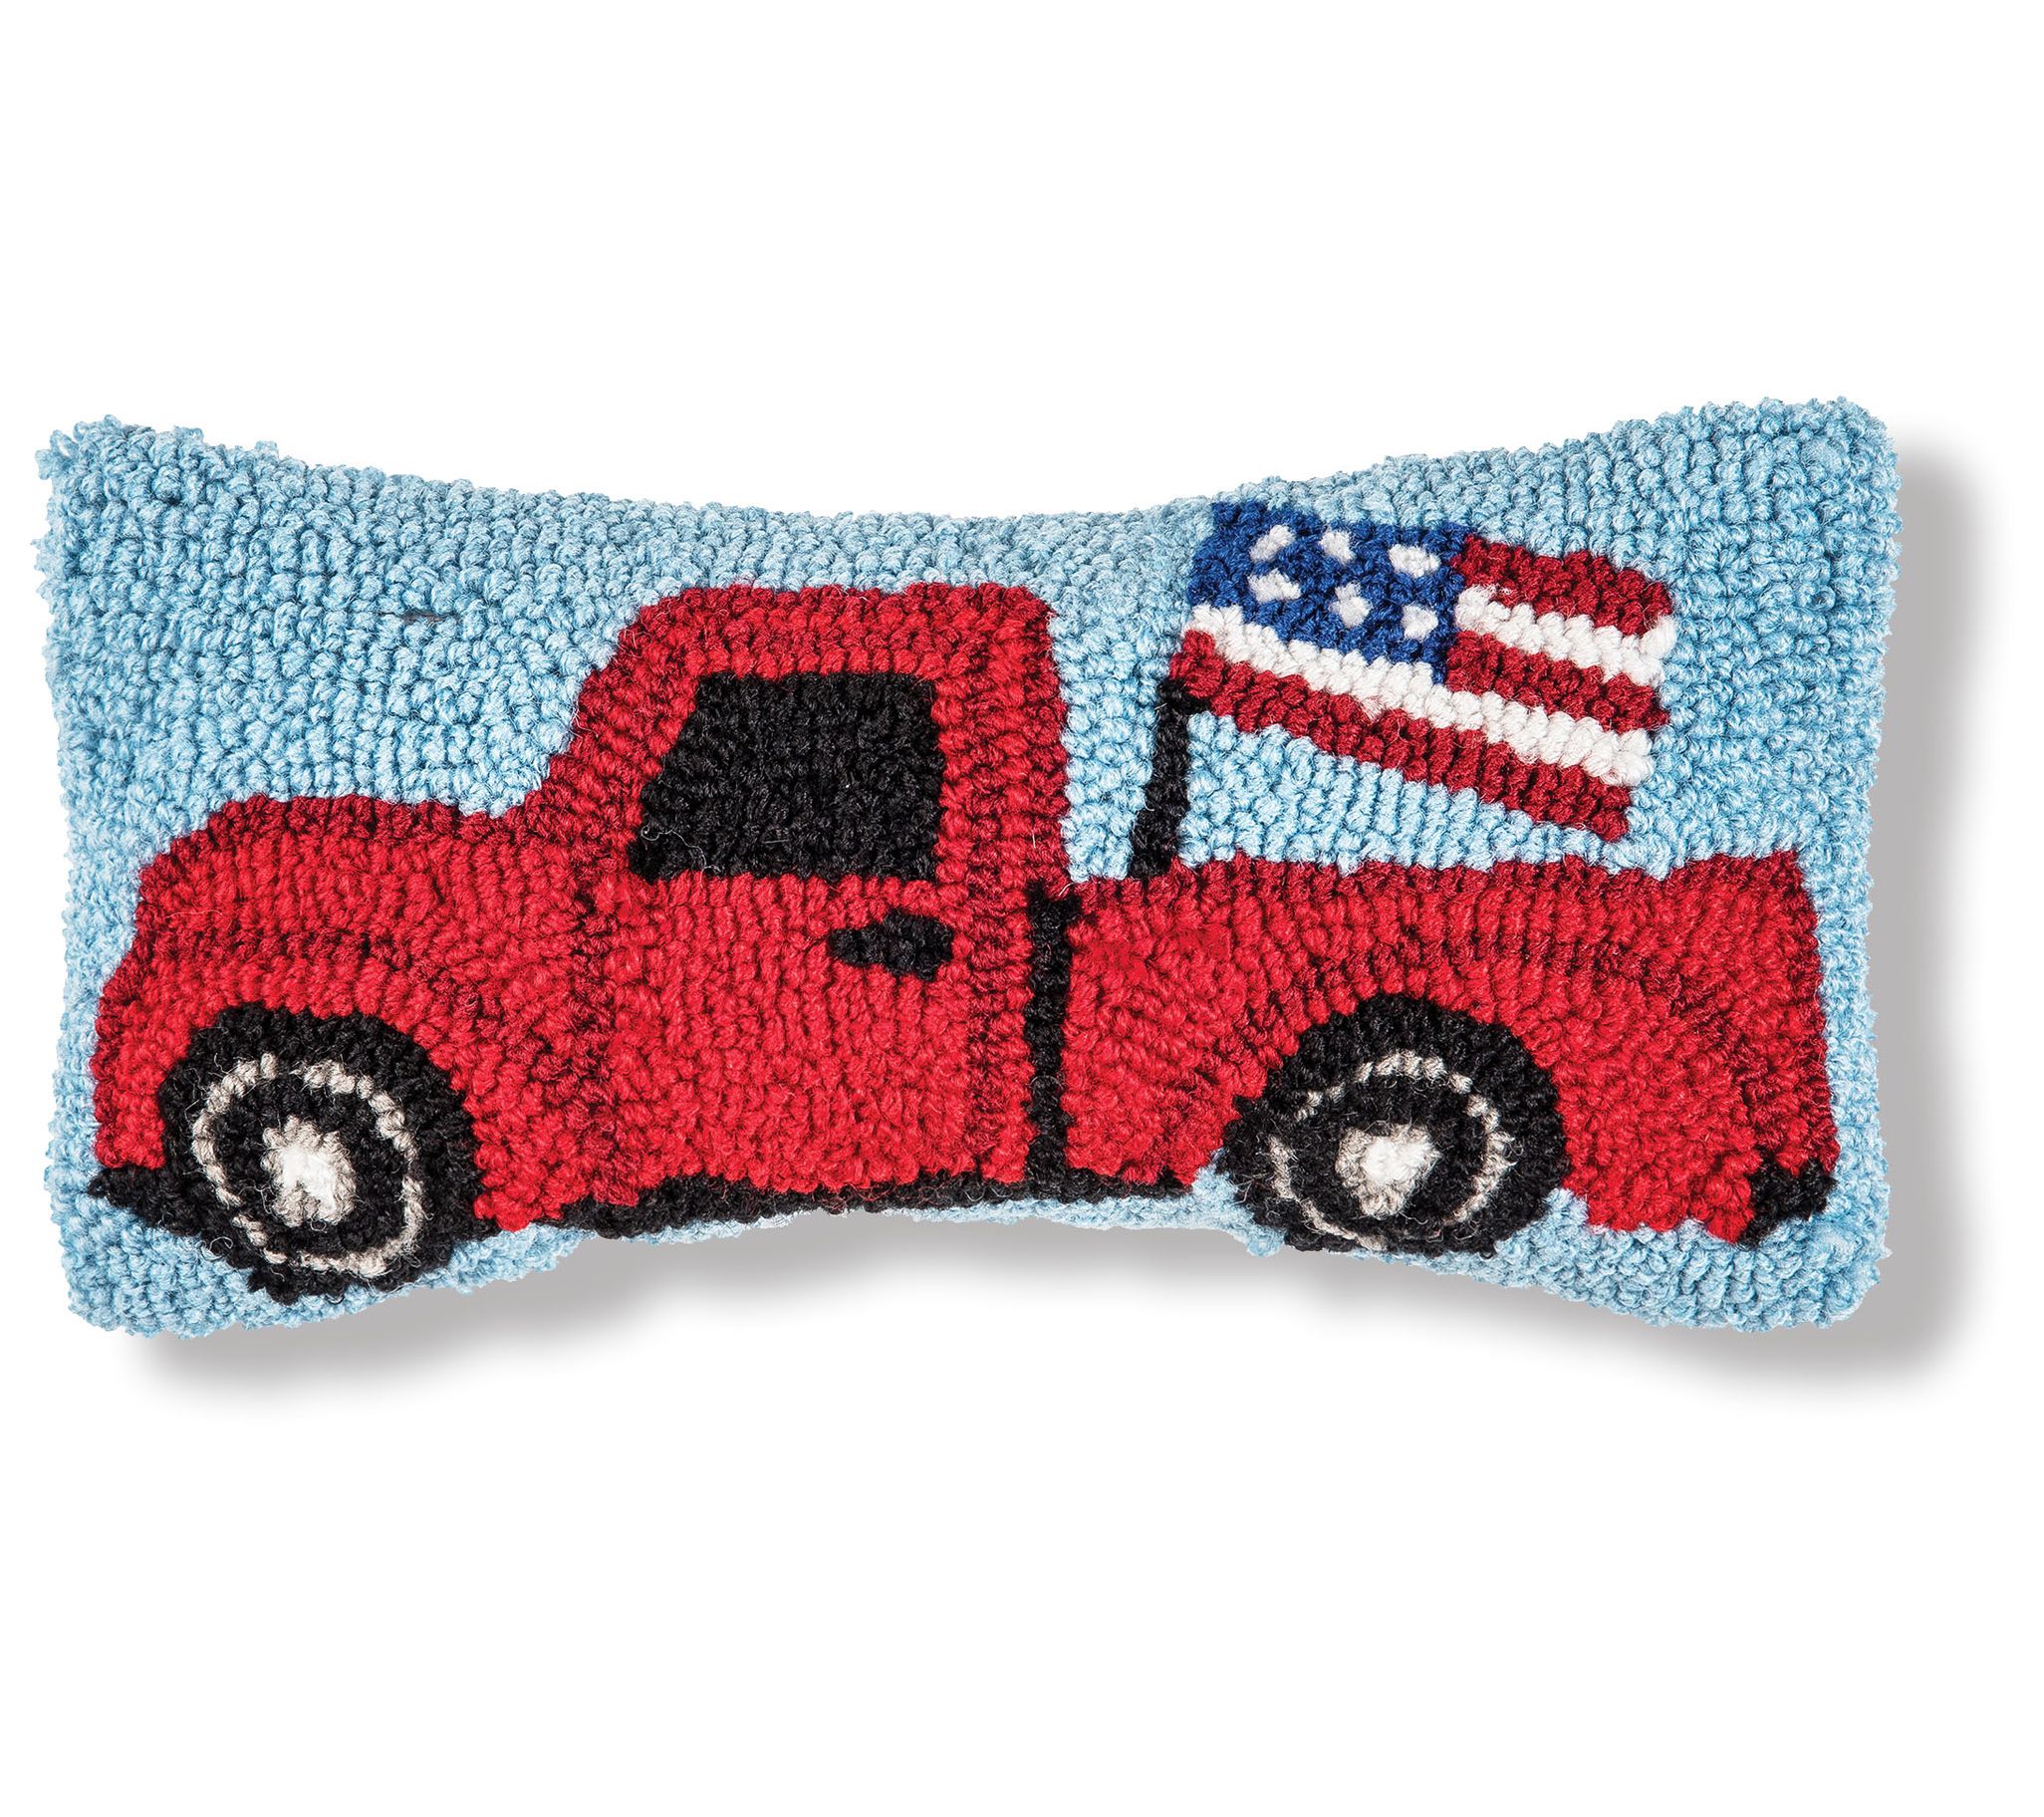 6 x 12 Patriotic Truck Hooked Americana Pillow by Valerie 